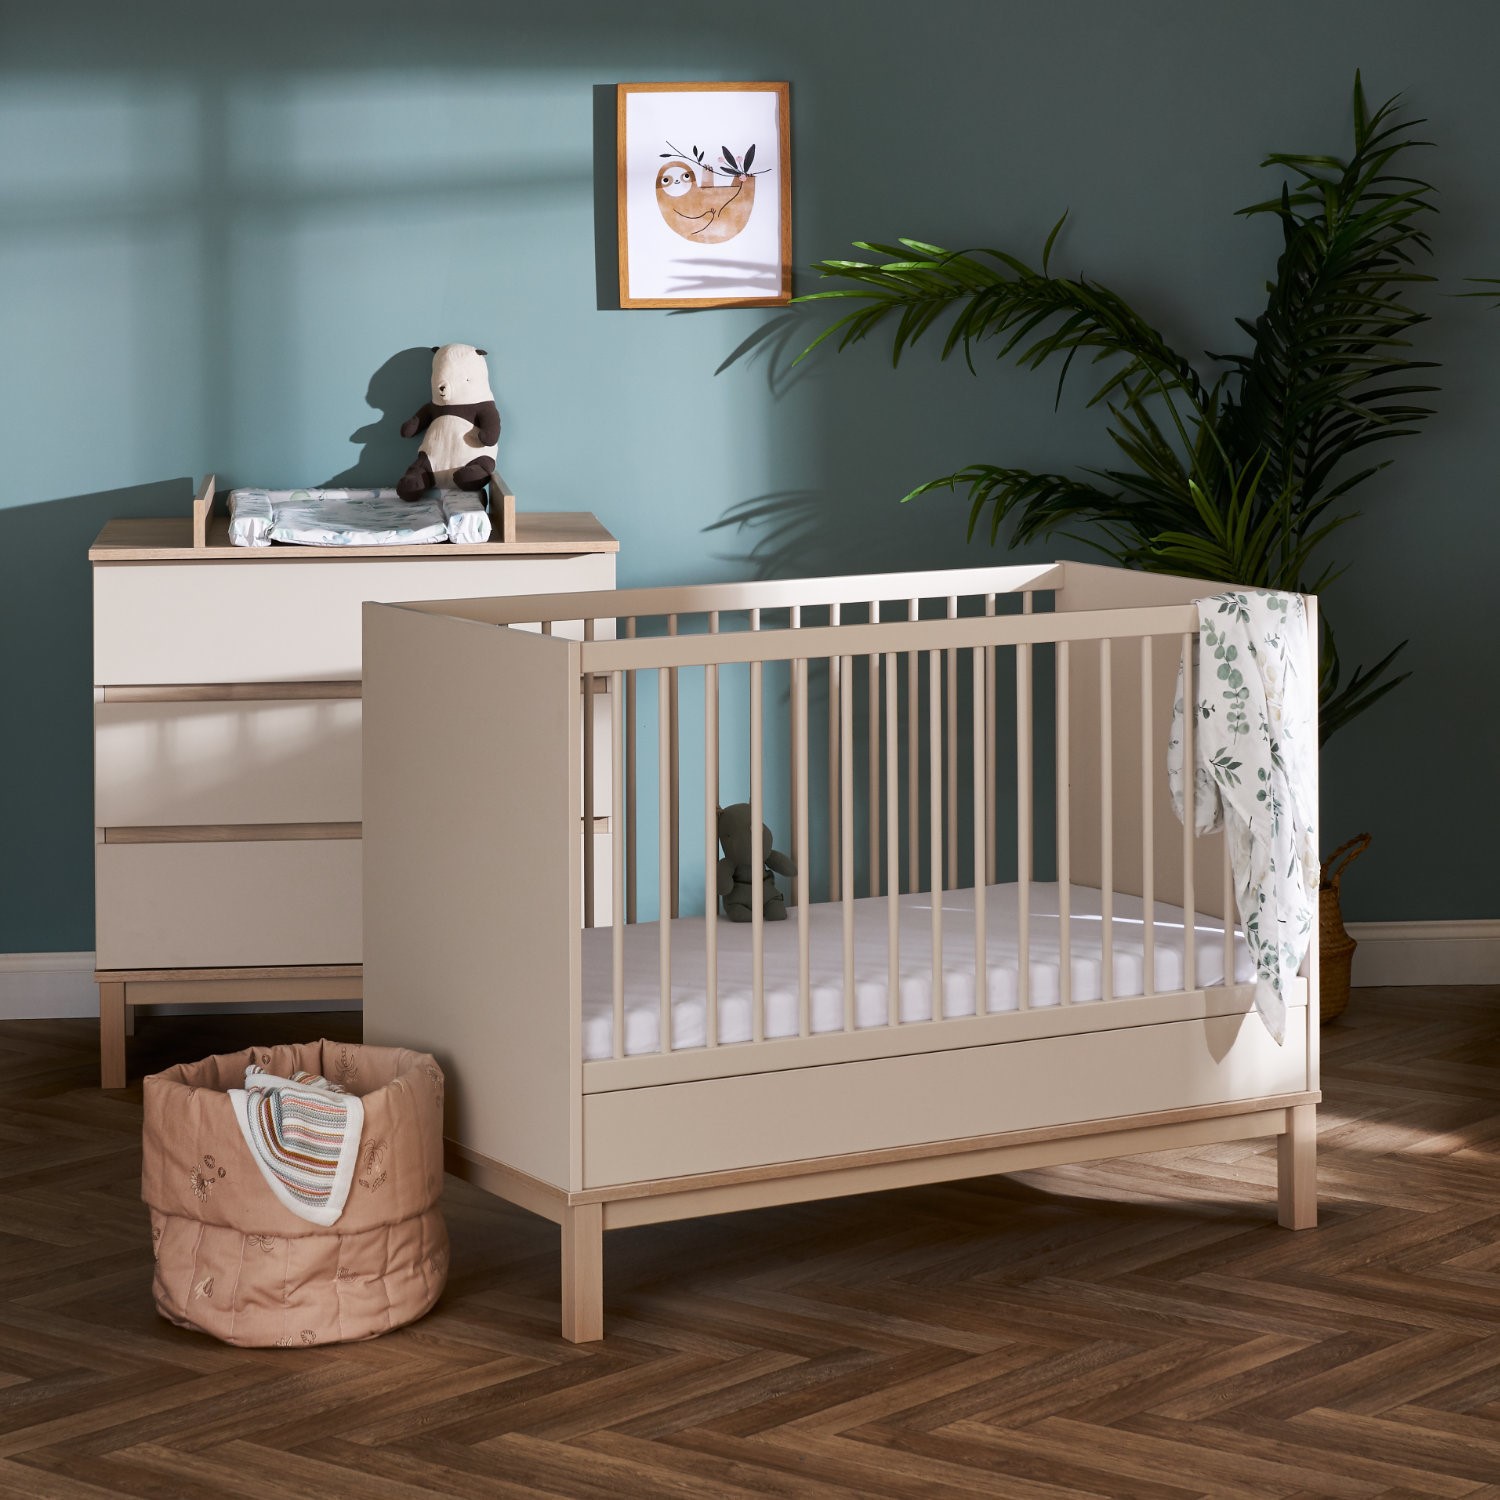 Photo of Satin mini 2 piece nursery furniture set - cot bed and changing table - astrid - obaby